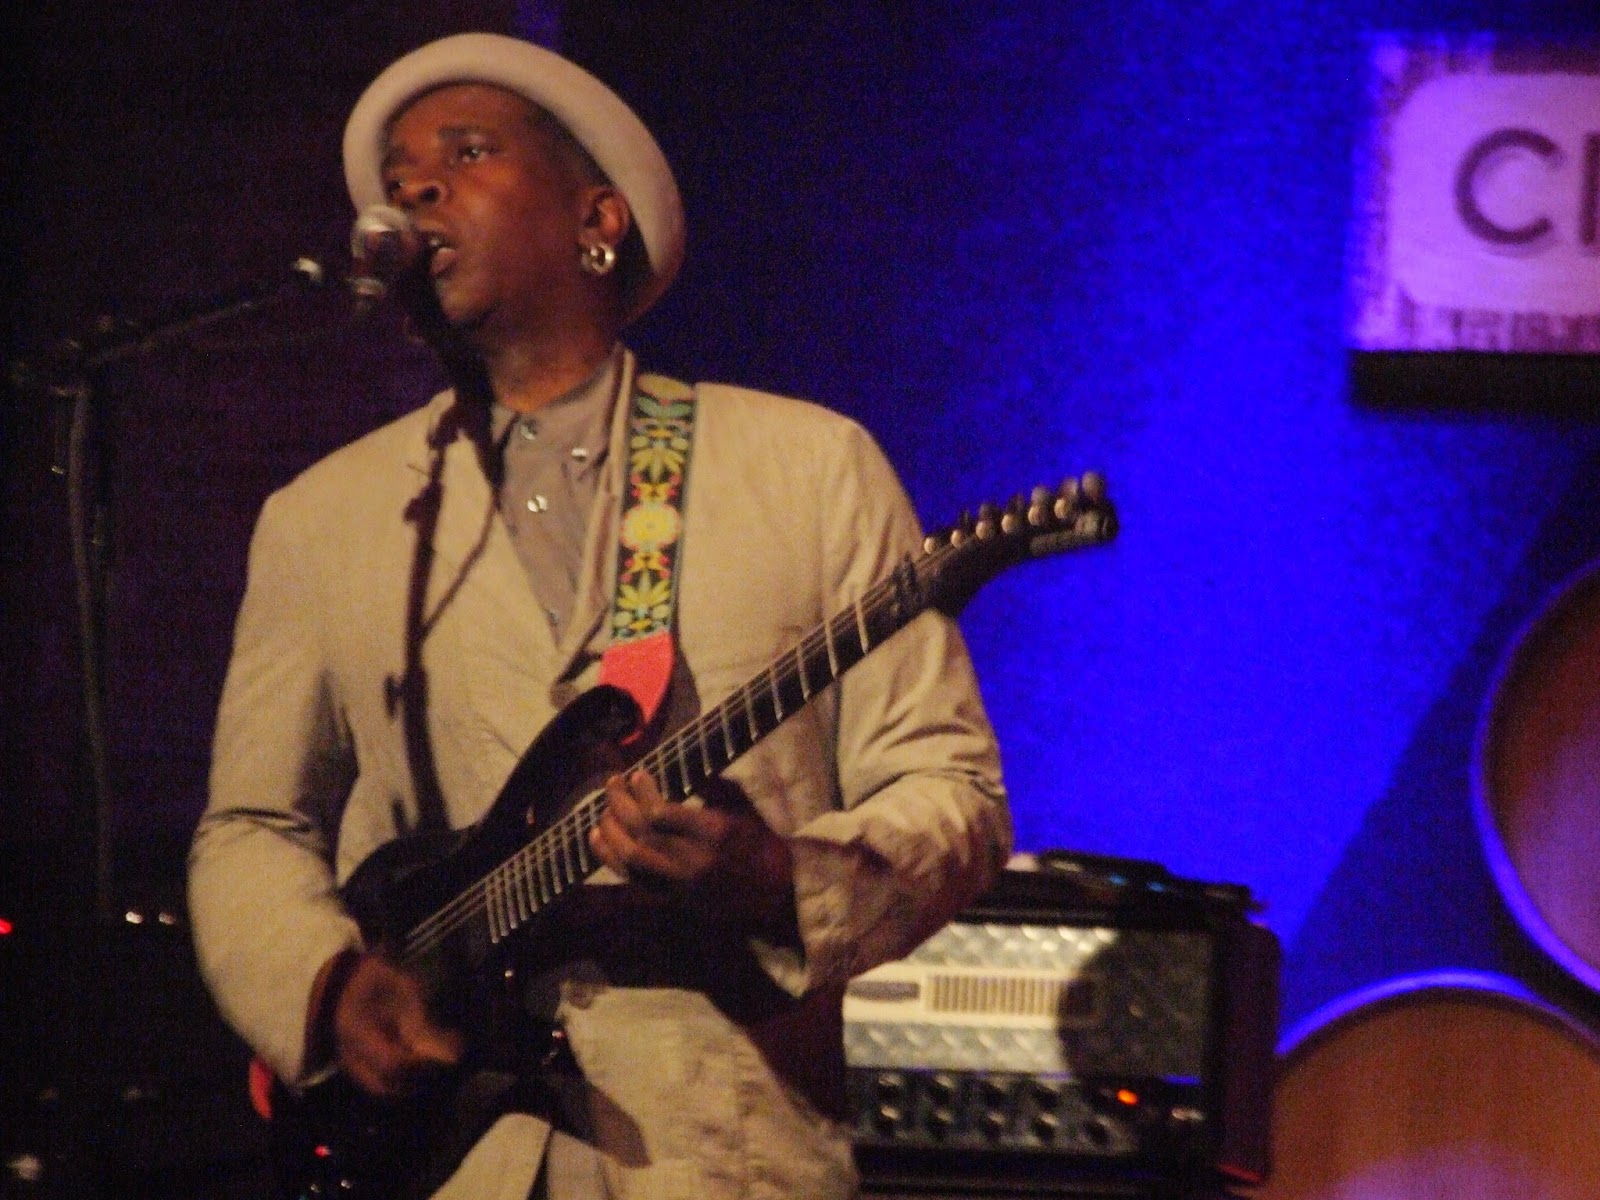 Living Colour - Live Photos from City Winery, NYC 6/1/14